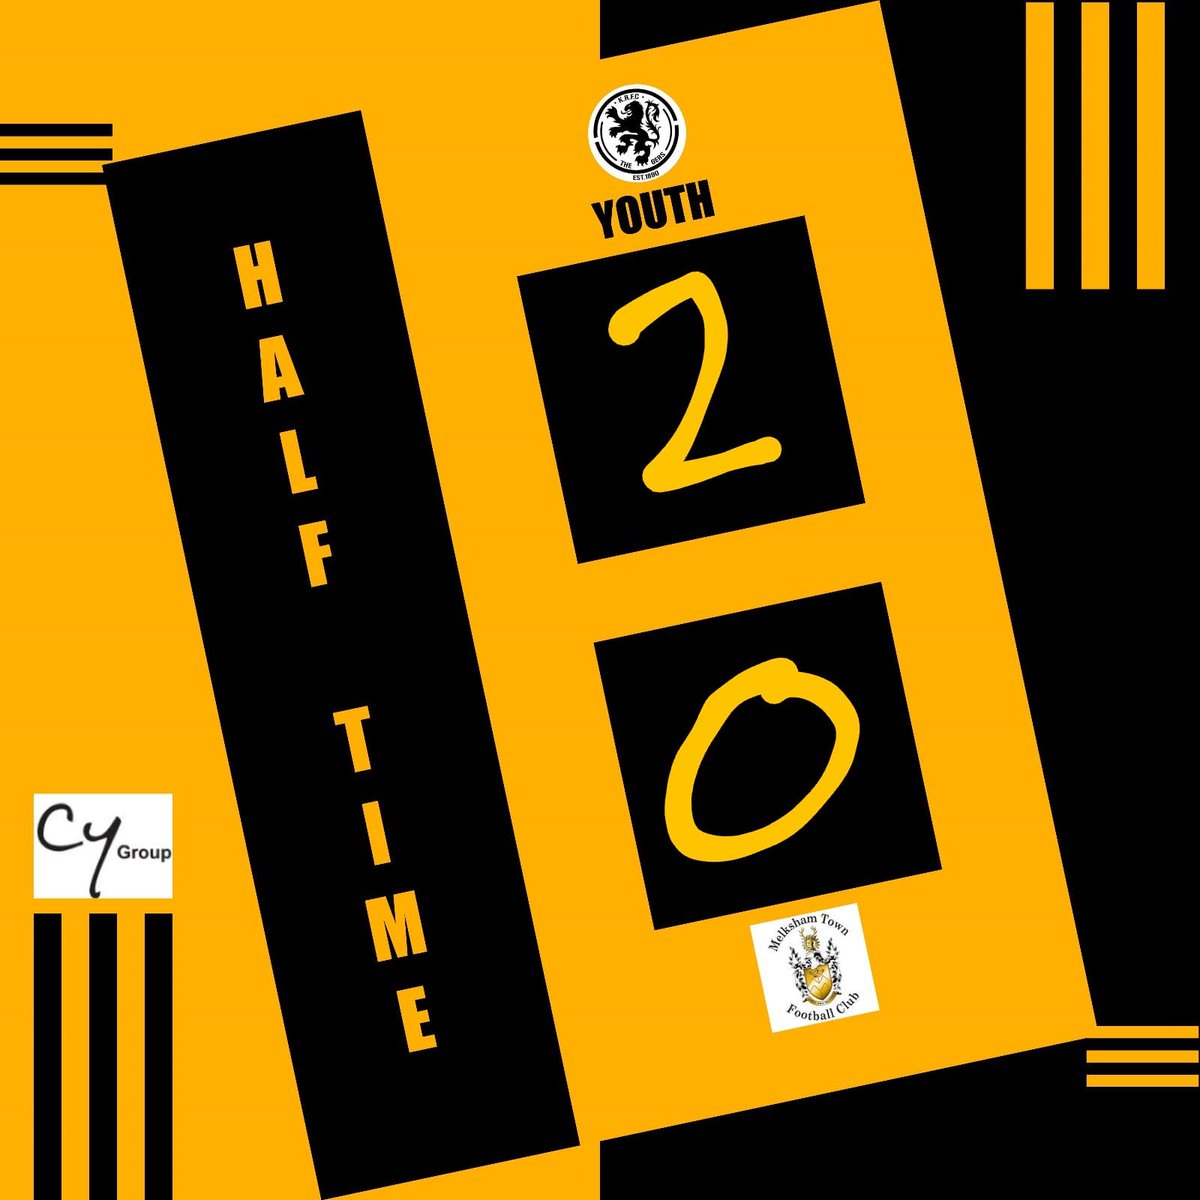 Goals from James Tomlinson and Kian McNally put the Under 18s ahead at the break.